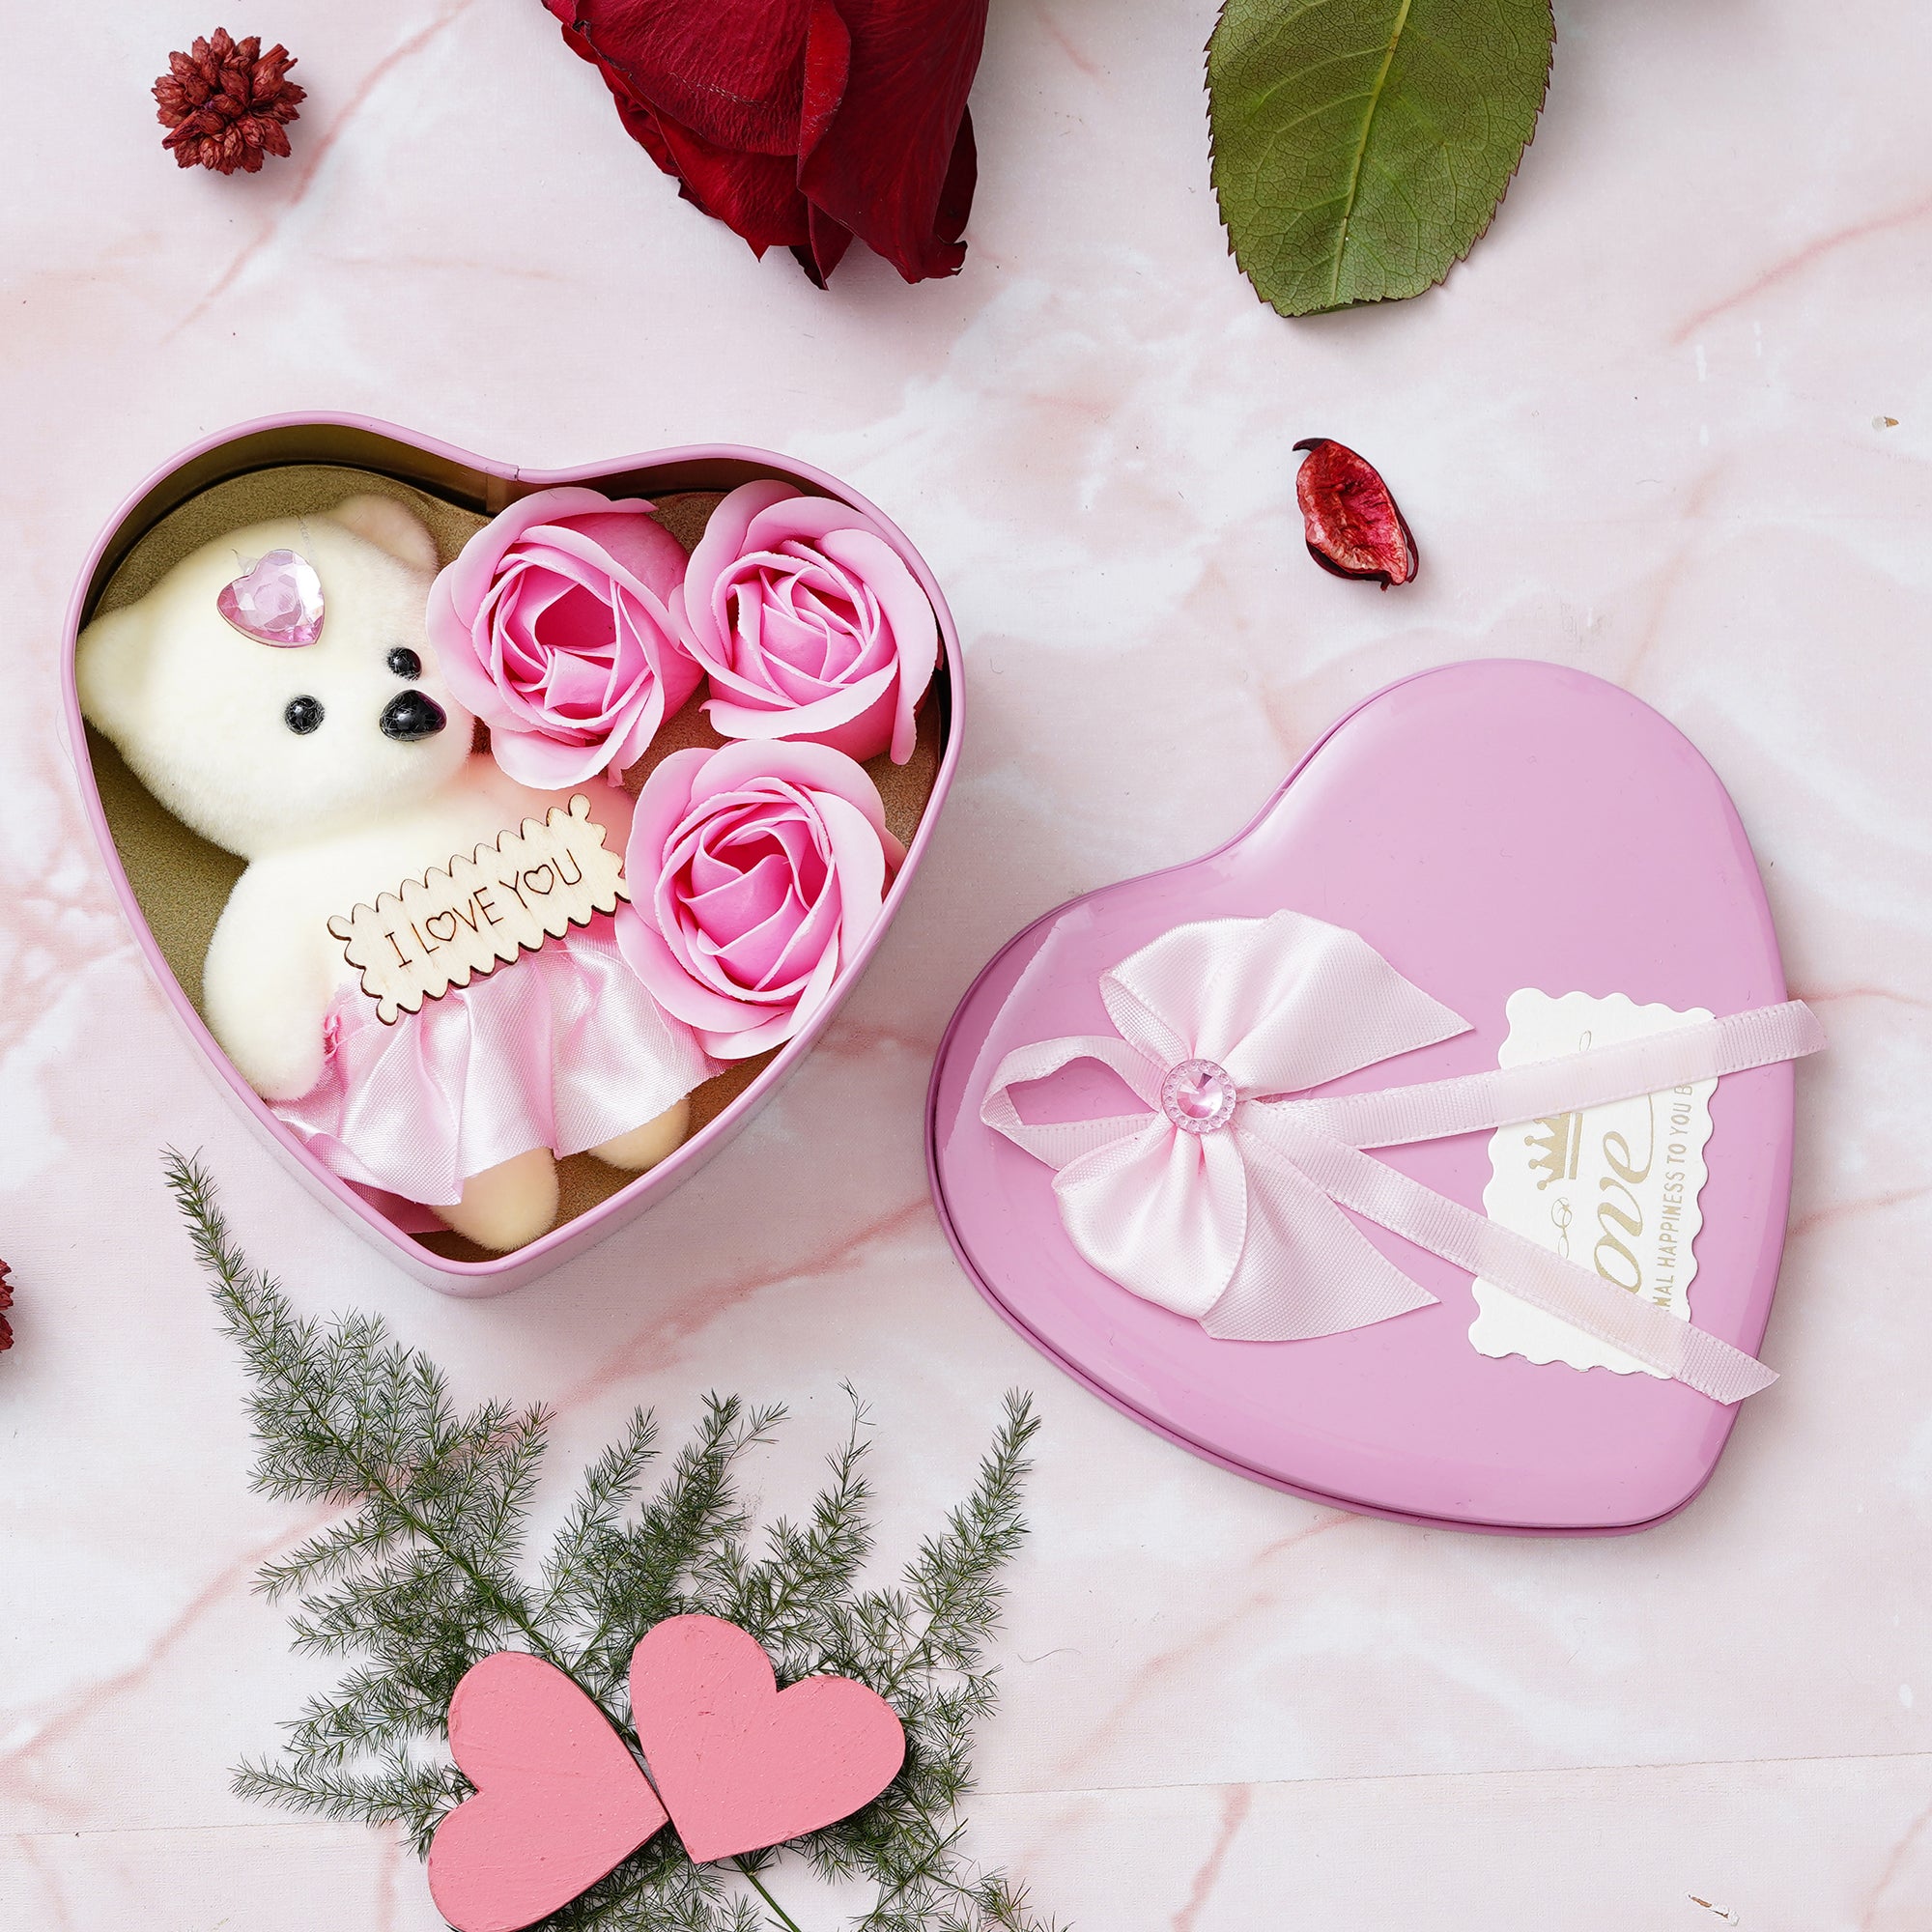 Valentine Combo of Set of 8 Love Post Cards Gift Cards Set, "My Heart Beats Only For You" Wooden Showpiece With Stand, Pink Heart Shaped Gift Box with Teddy and Roses 5